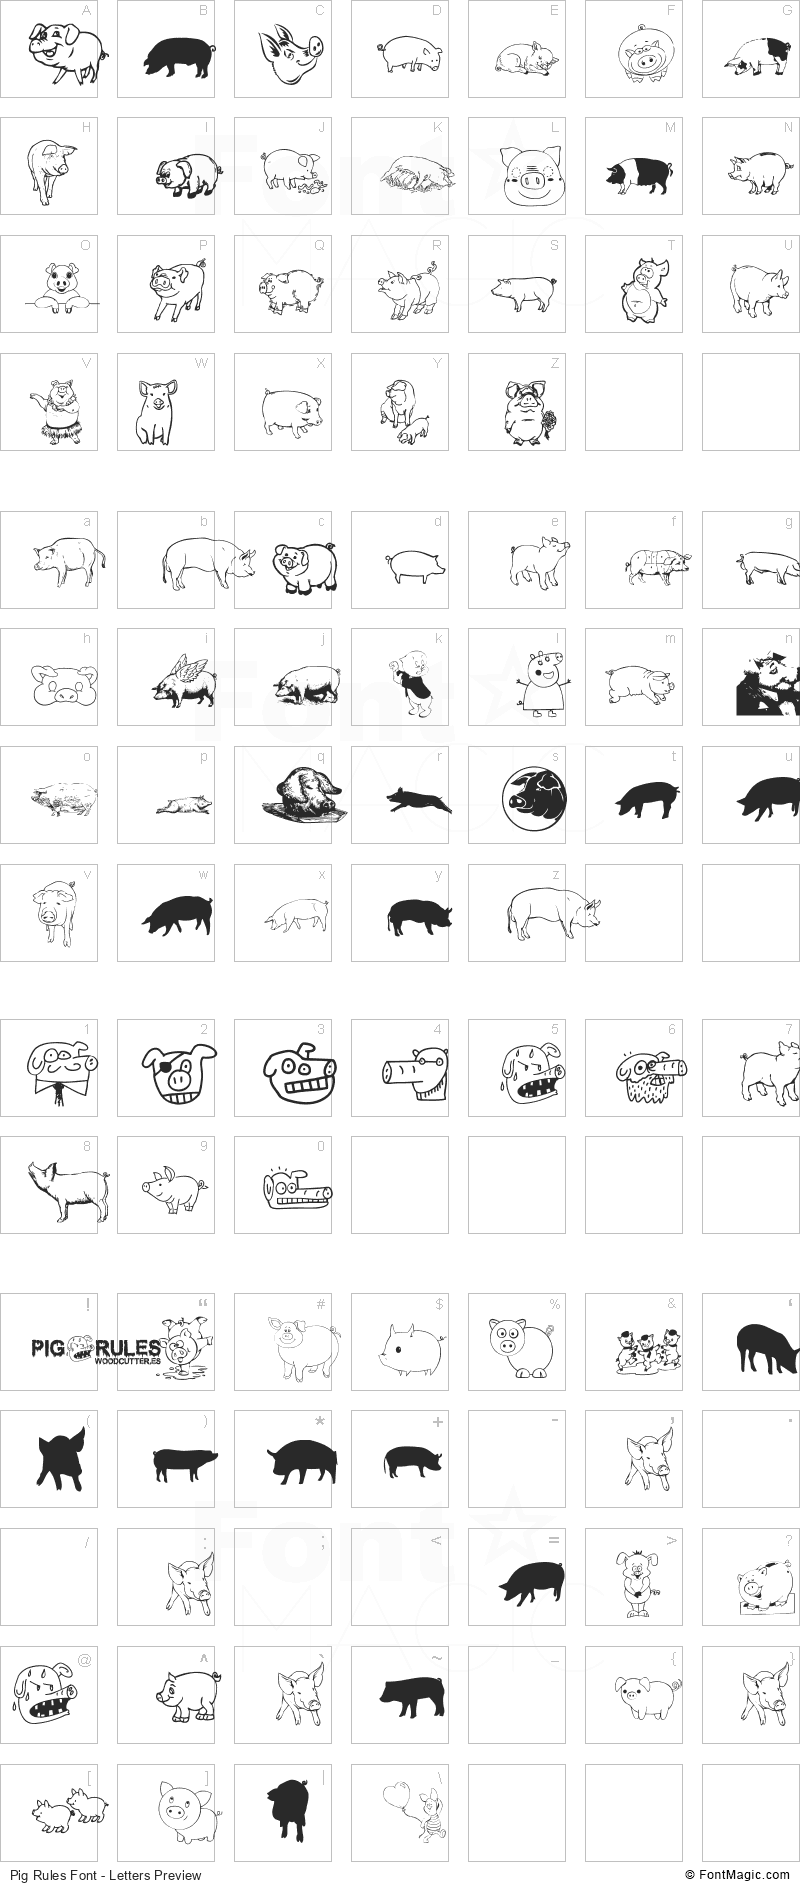 Pig Rules Font - All Latters Preview Chart